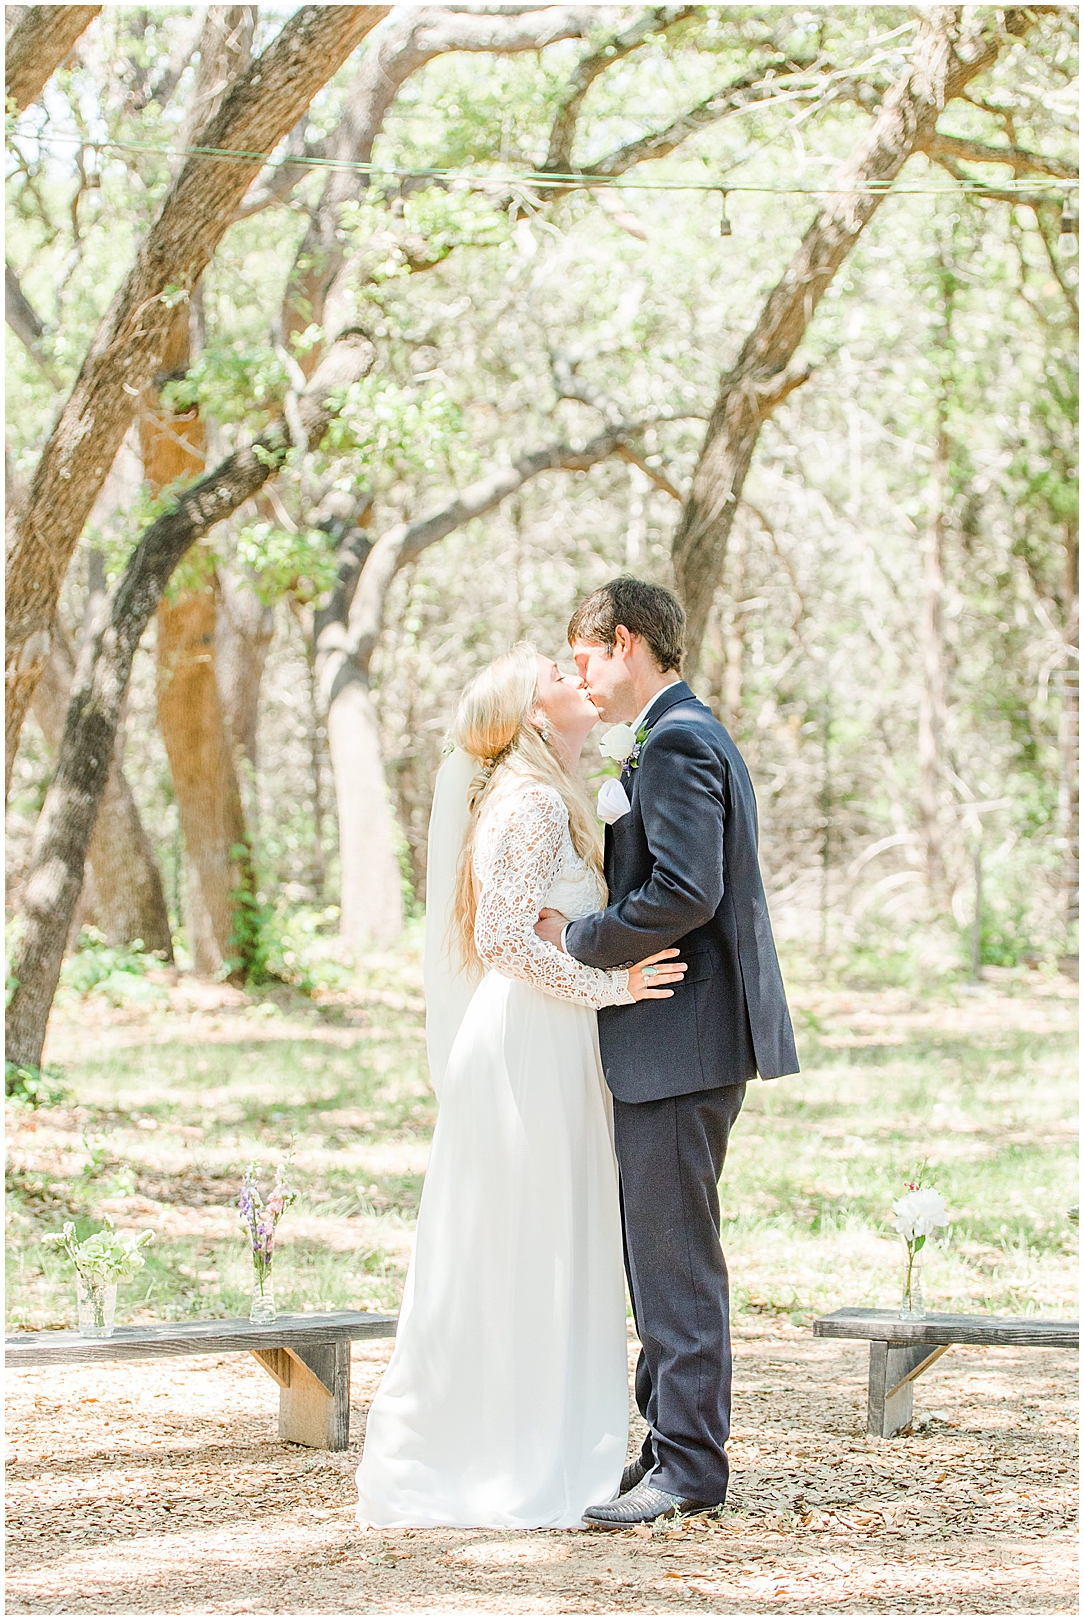 An Intimate elopement for two in Dripping Springs Texas by Allison Jeffers Photography 0029